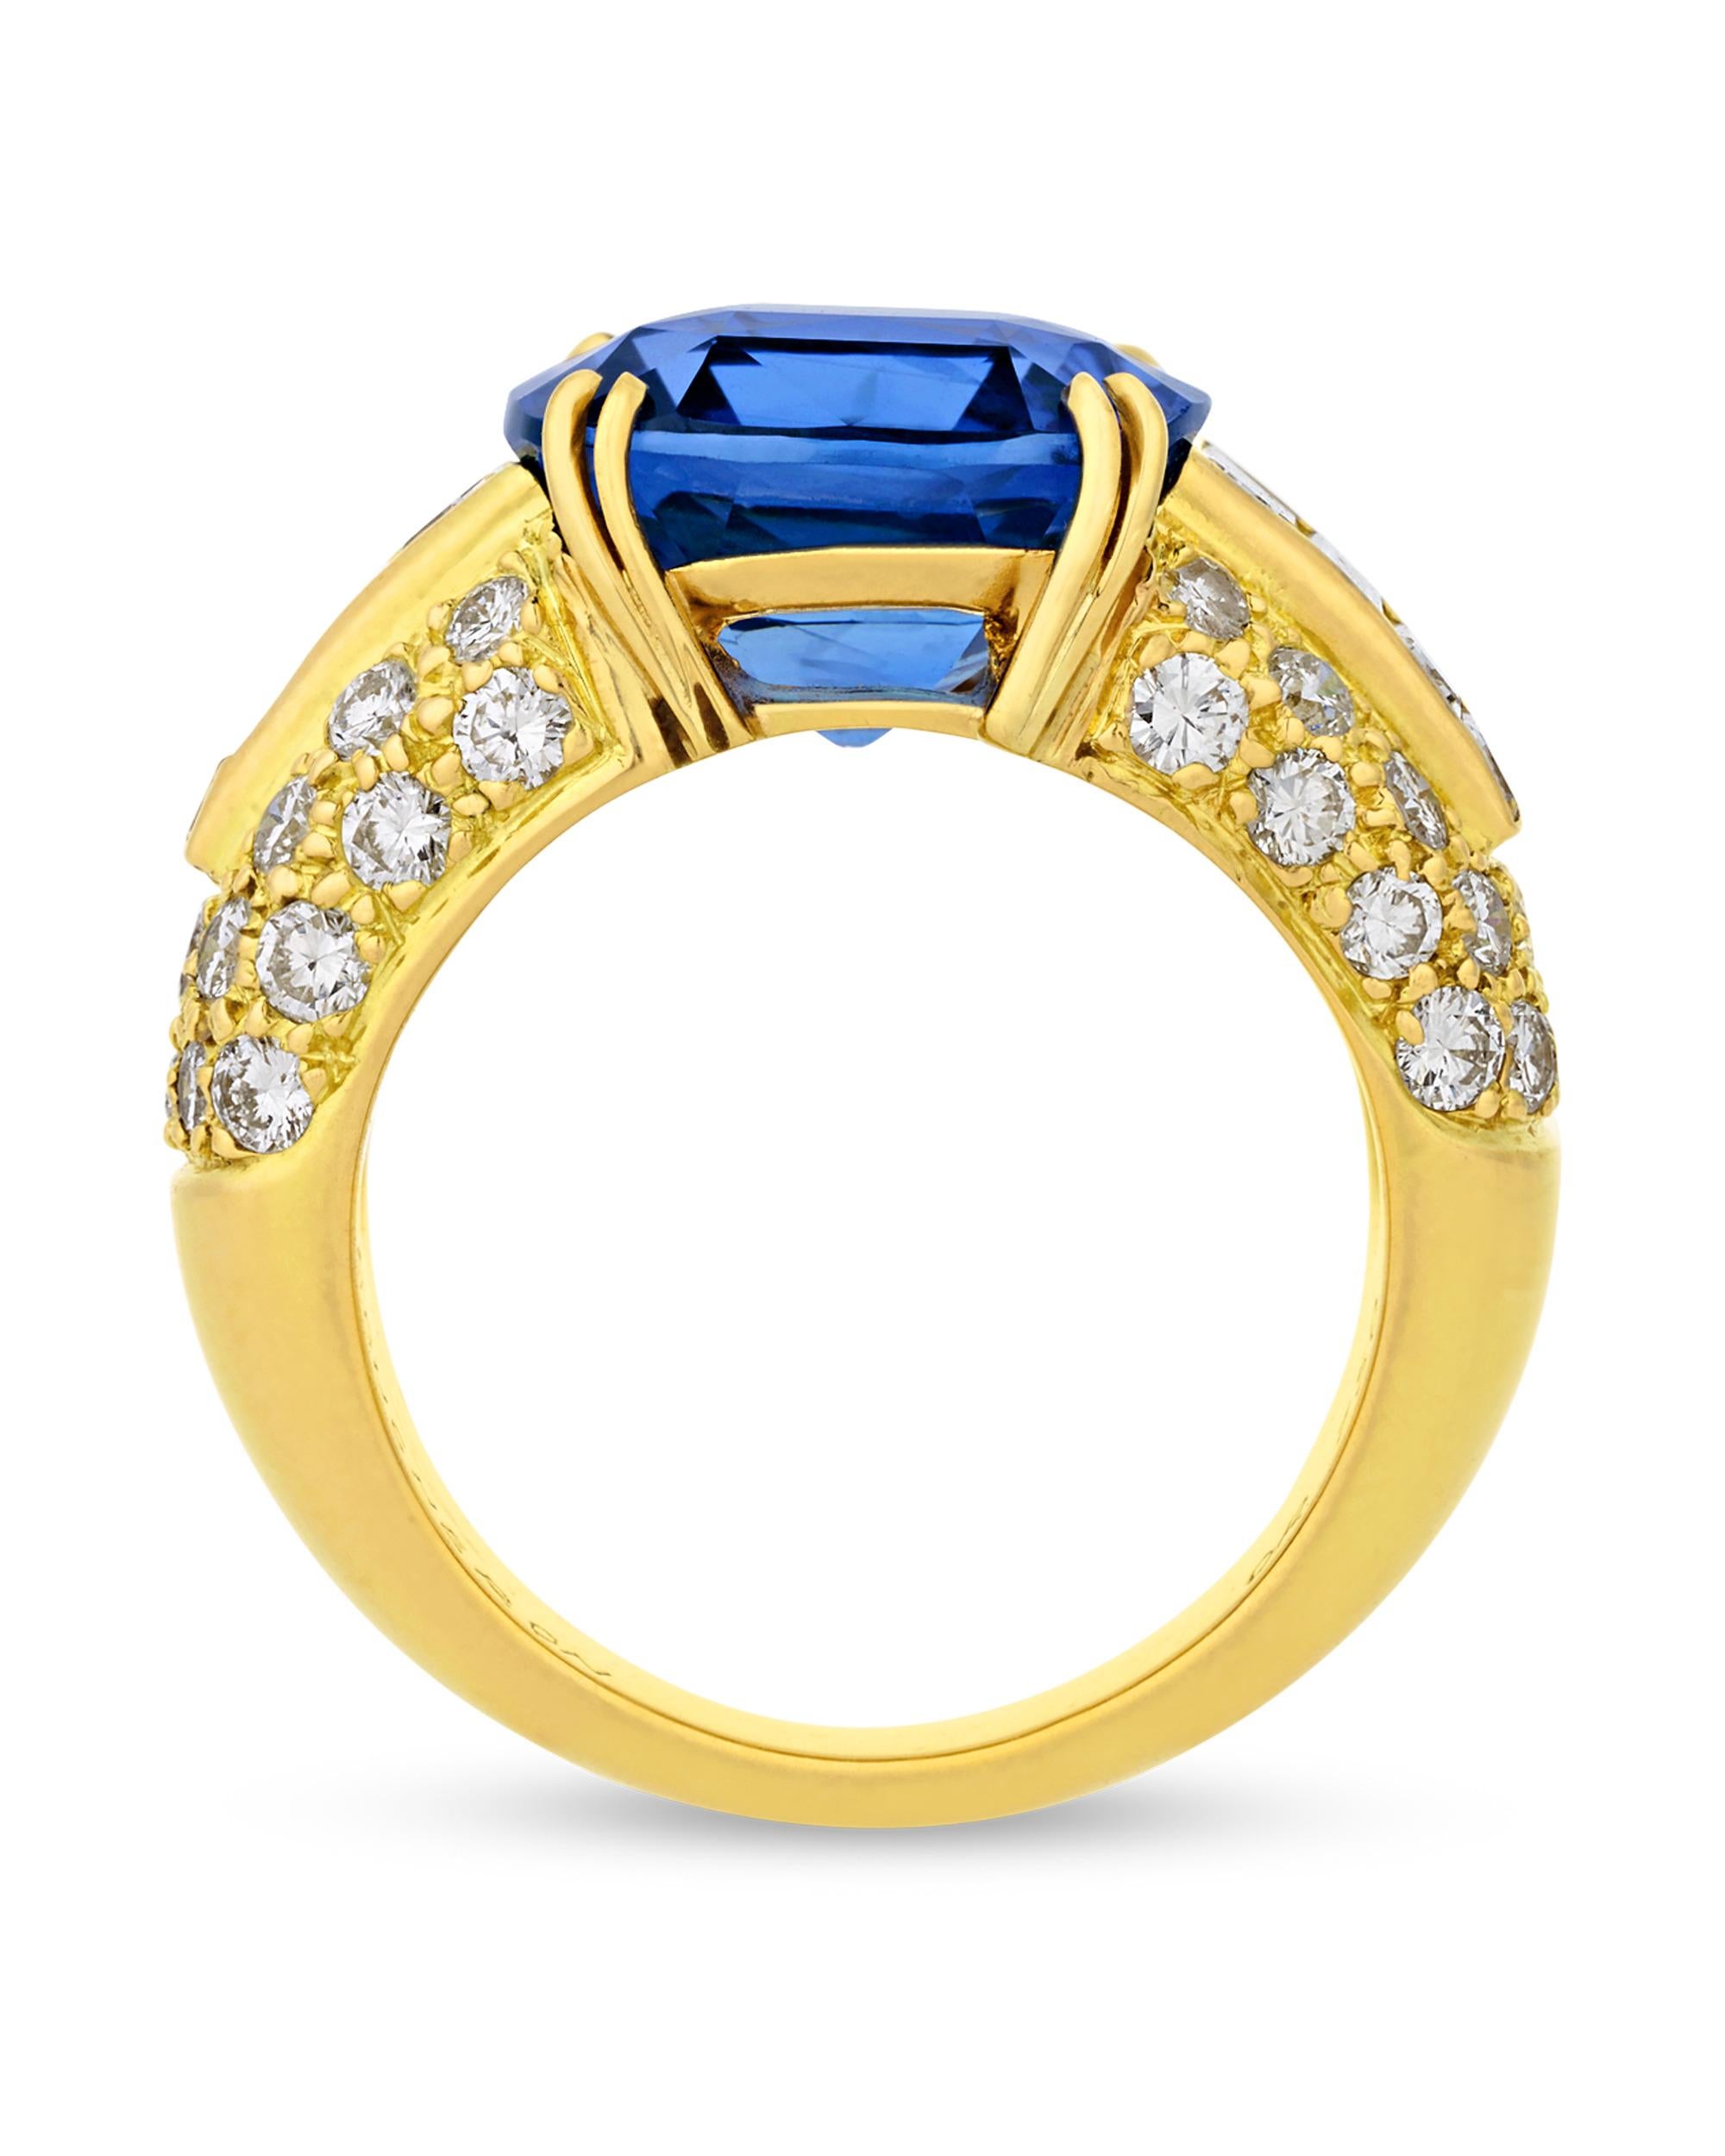 An exceptional 7.11-carat royal blue sapphire forms the focal point of this ring. The gemstone is certified by Gübelin as hailing from Burma and being completely untreated, with no gemological evidence of heat treatments to enhance the stone's hue.